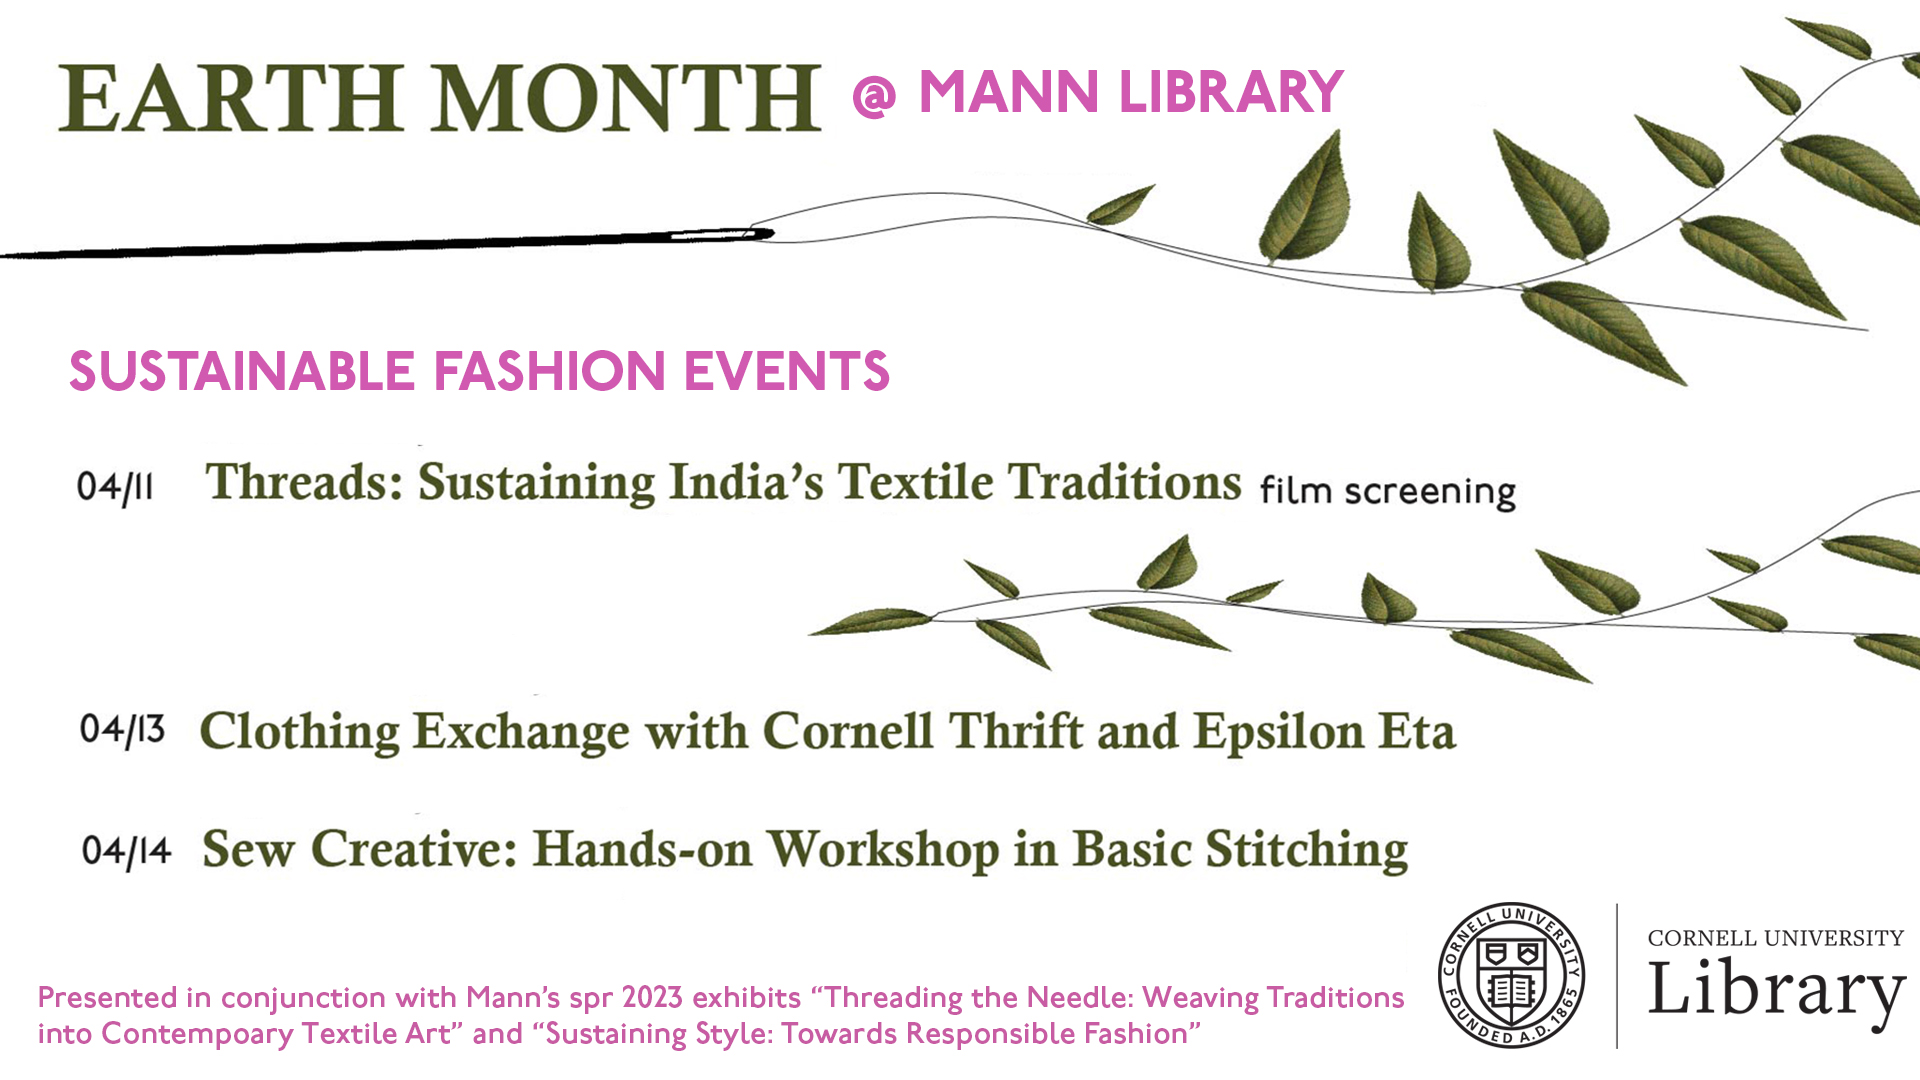 Earth Month @ Mann Library: Sustainable Fashion Events; 04/11 Threads: Sustaining India's Textile Traditions (film screening); 04/13 Clothing Exchange with Cornell Thrift and Epsilon Eta; 04/14 Sew Creative: Hands-on Workshop in Basic Stitching. Presented in conjunction with Mann's spr 2023 exhibits 